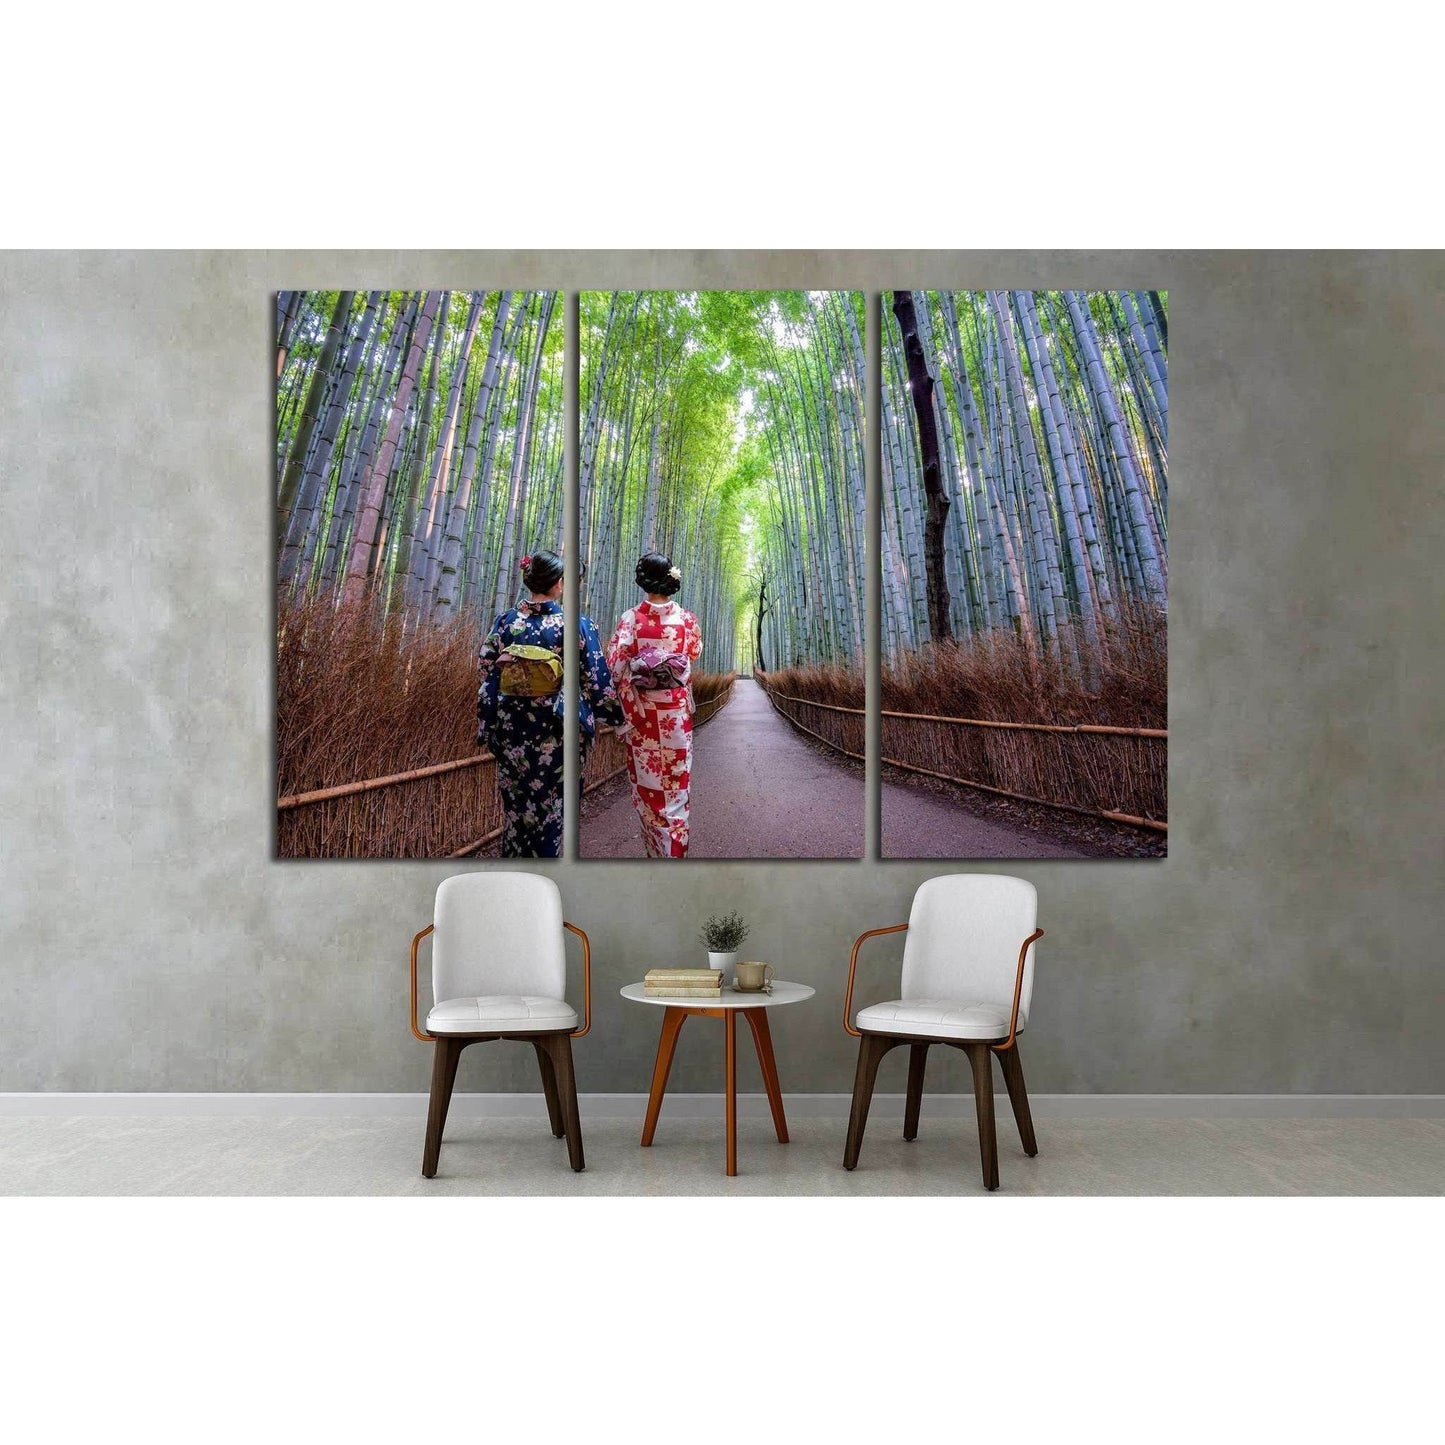 Bamboo forest of Arashiyama, Kyoto, Japan. Arashiyama is a district on the western outskirts of Kyoto №2002 Ready to Hang Canvas PrintCanvas art arrives ready to hang, with hanging accessories included and no additional framing required. Every canvas prin